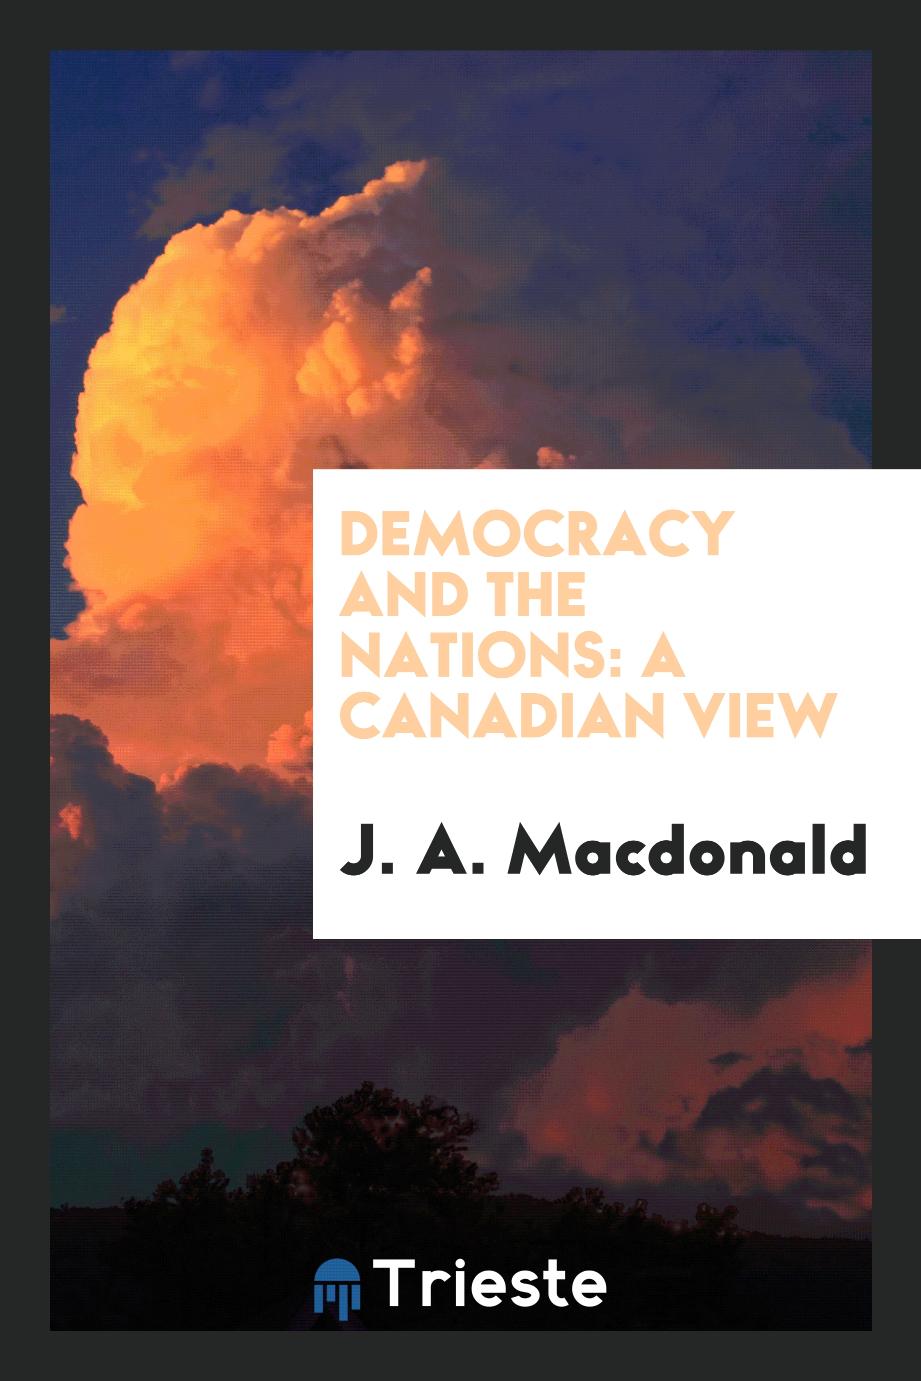 J. A. Macdonald - Democracy and the Nations: A Canadian View